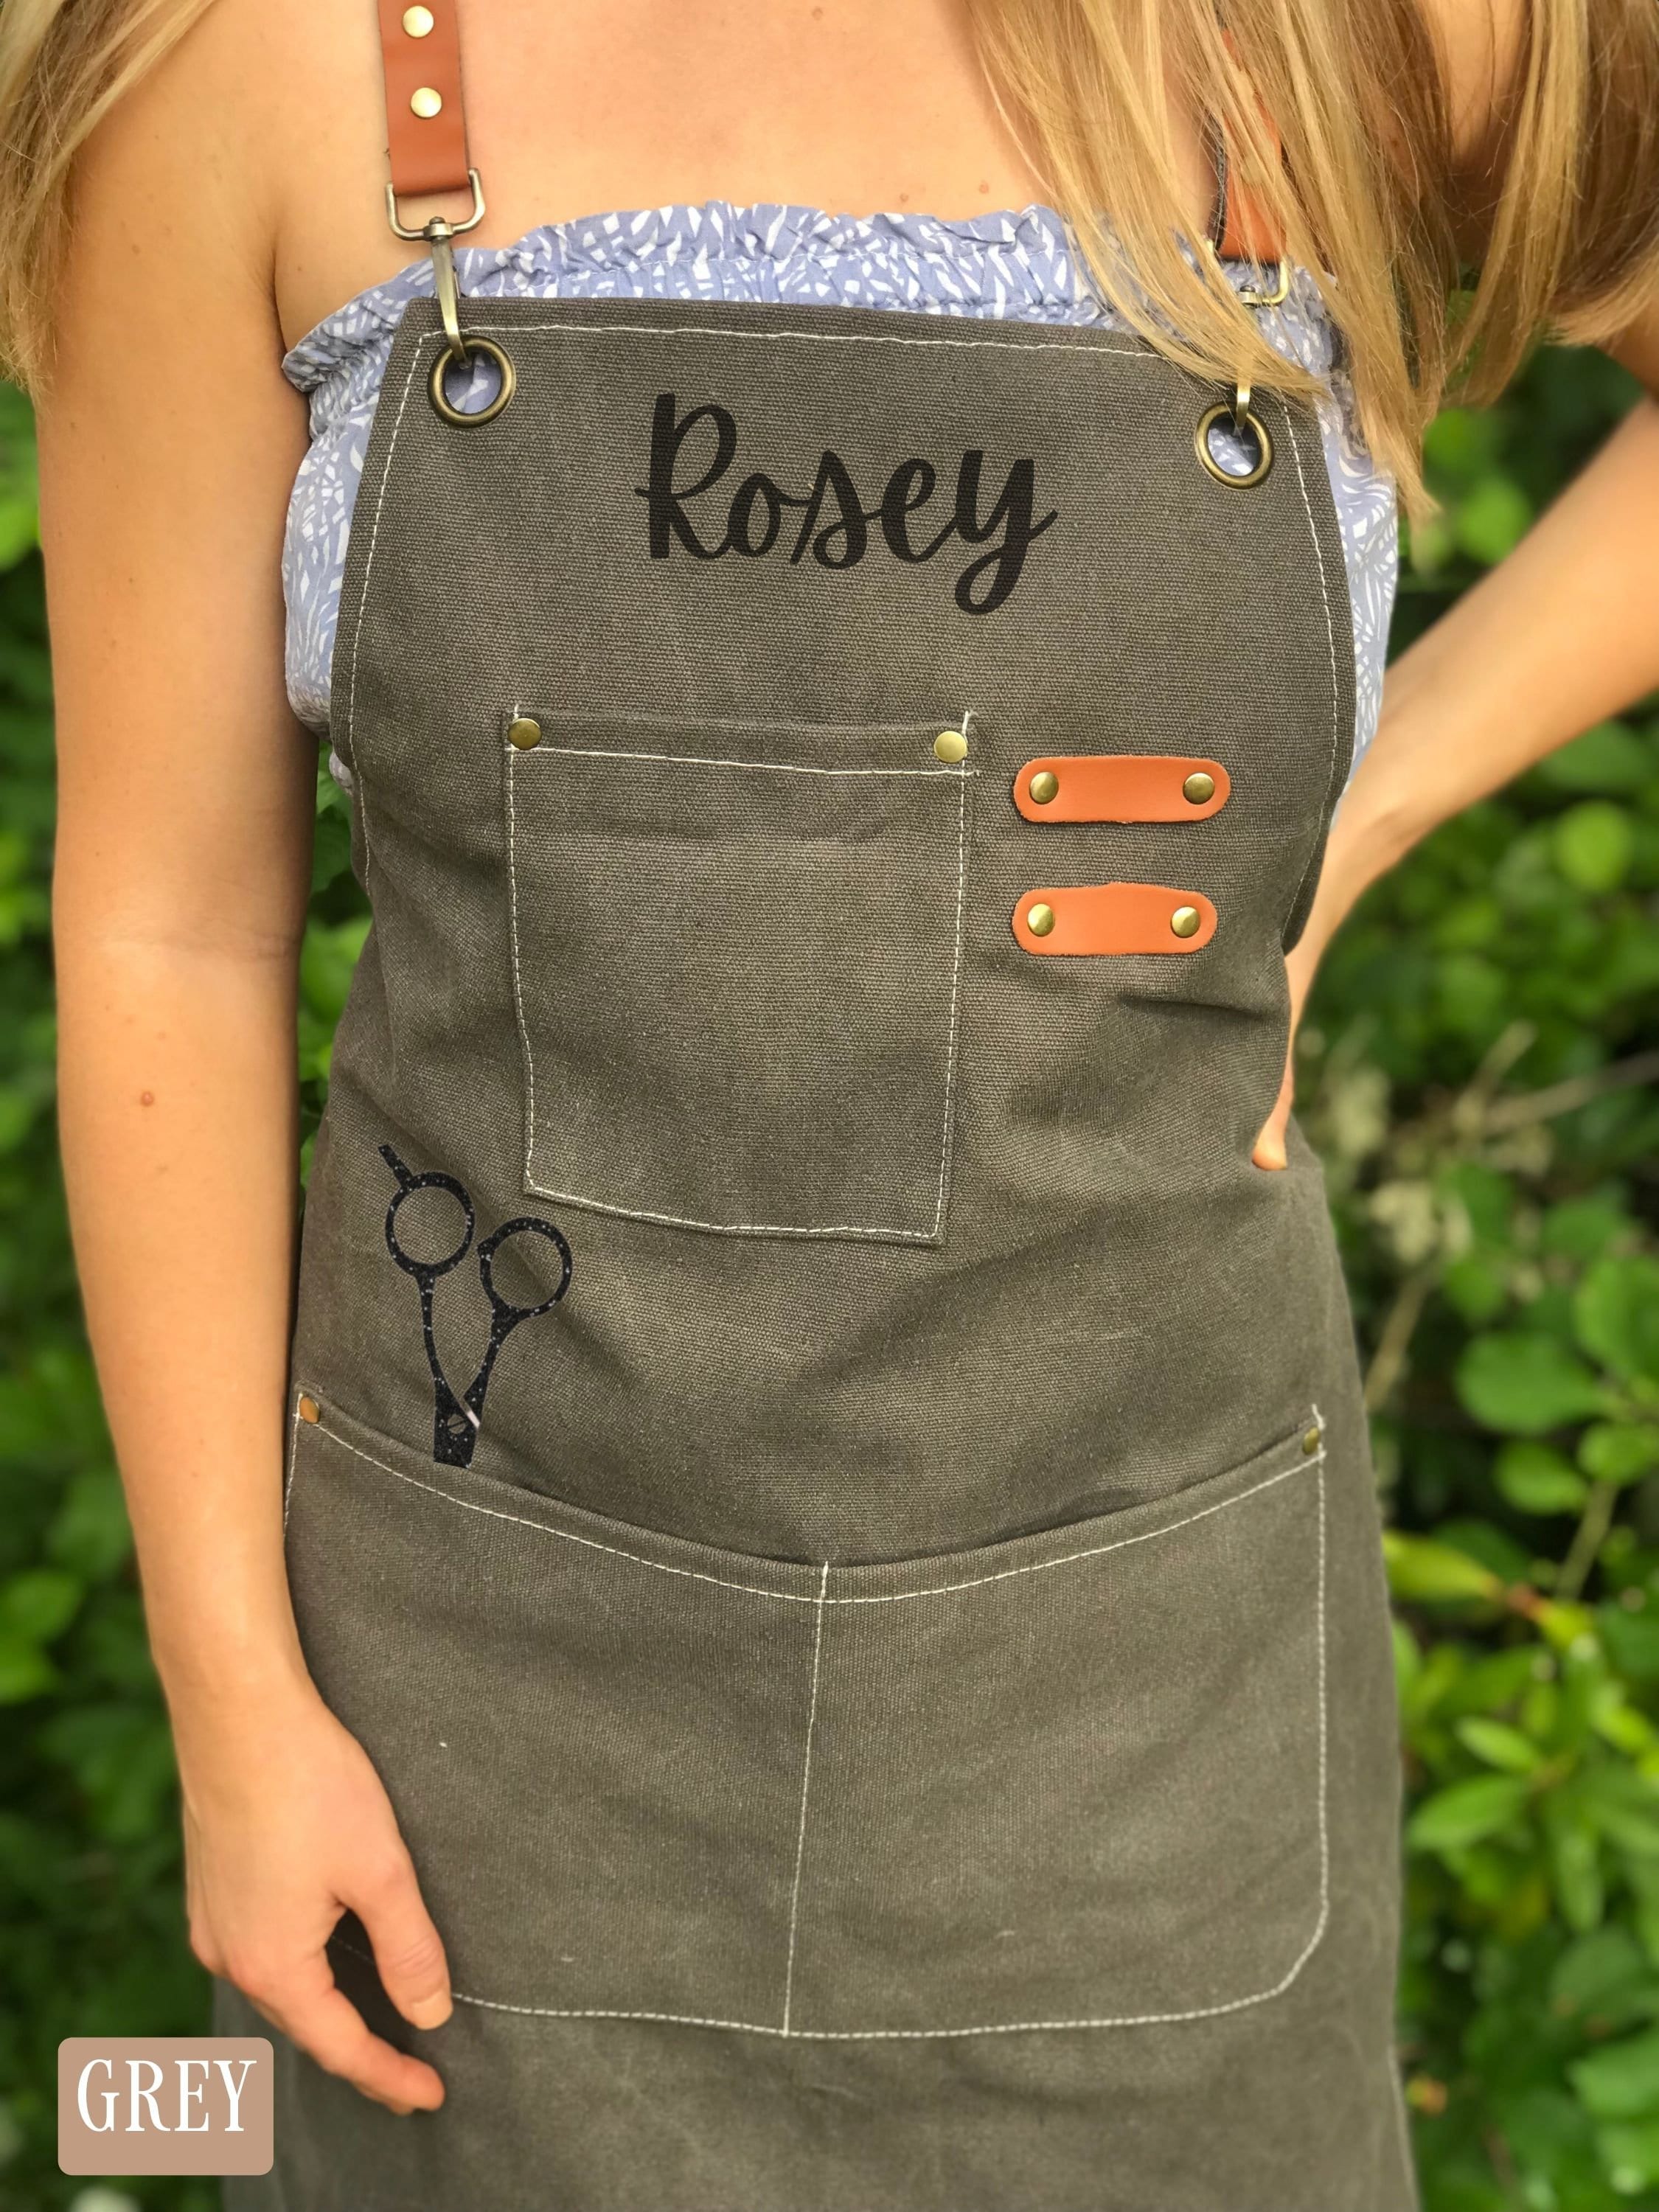 Hairstylist Apron with Pockets Hairdresser Custom Apron for Hair Stylist Customized Apron Personalized Apron for Women Custom Logo Apron